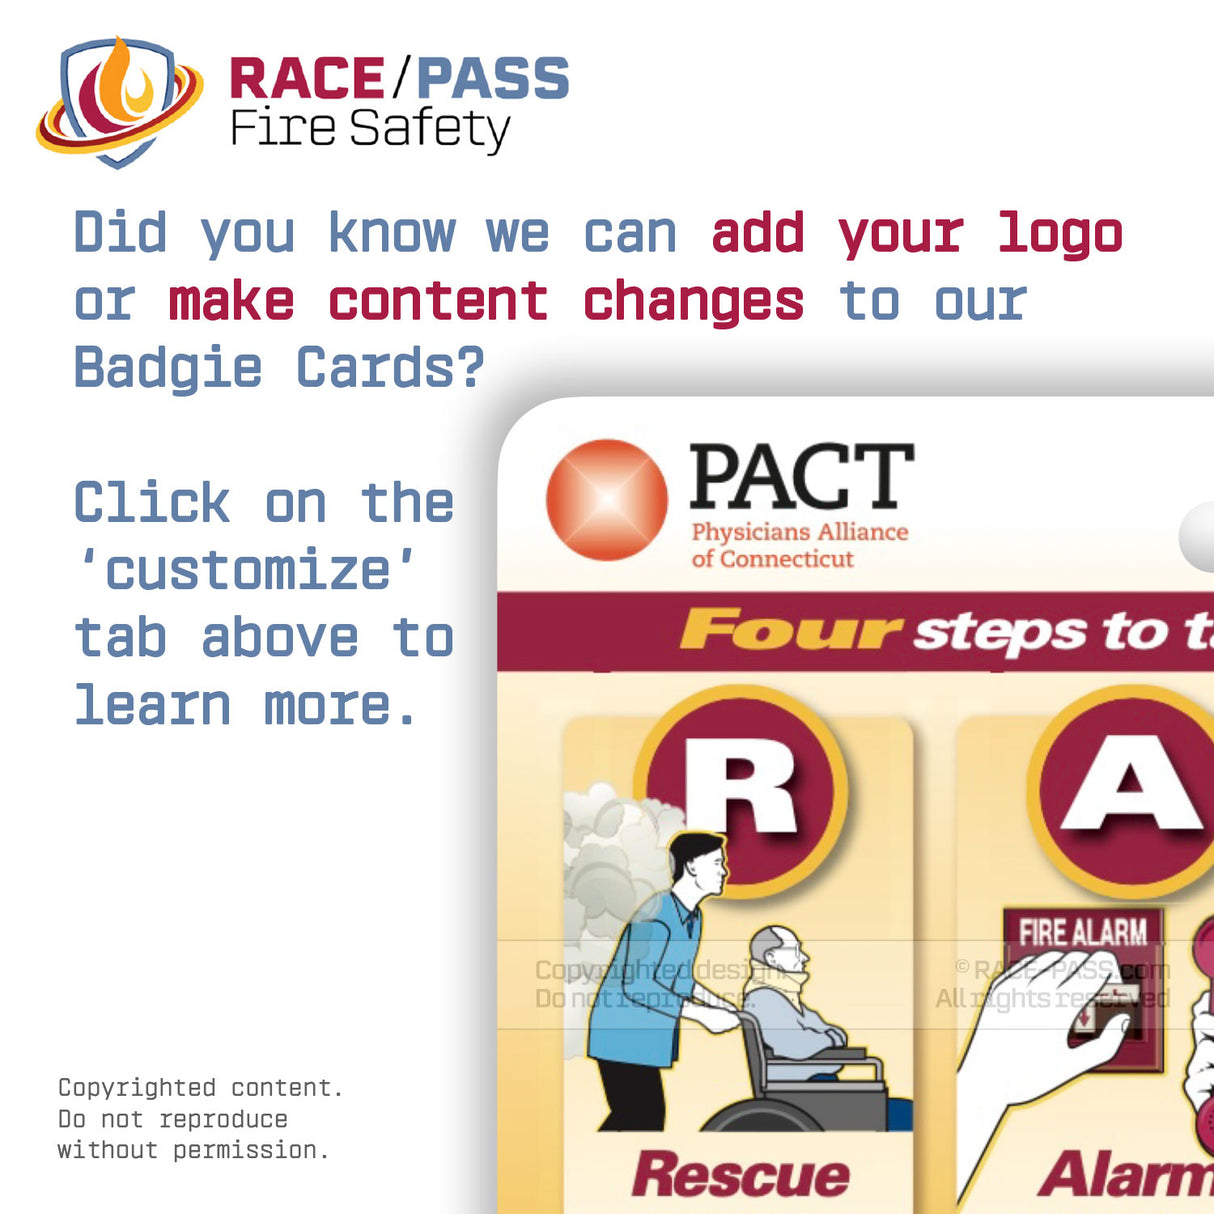 RACE/PASS Fire Safety Badgie Card.  Also, did you know we offer customization options for our Badgie Cards? You can add your logo or make content changes. Just click on the Customize tab above to learn more.